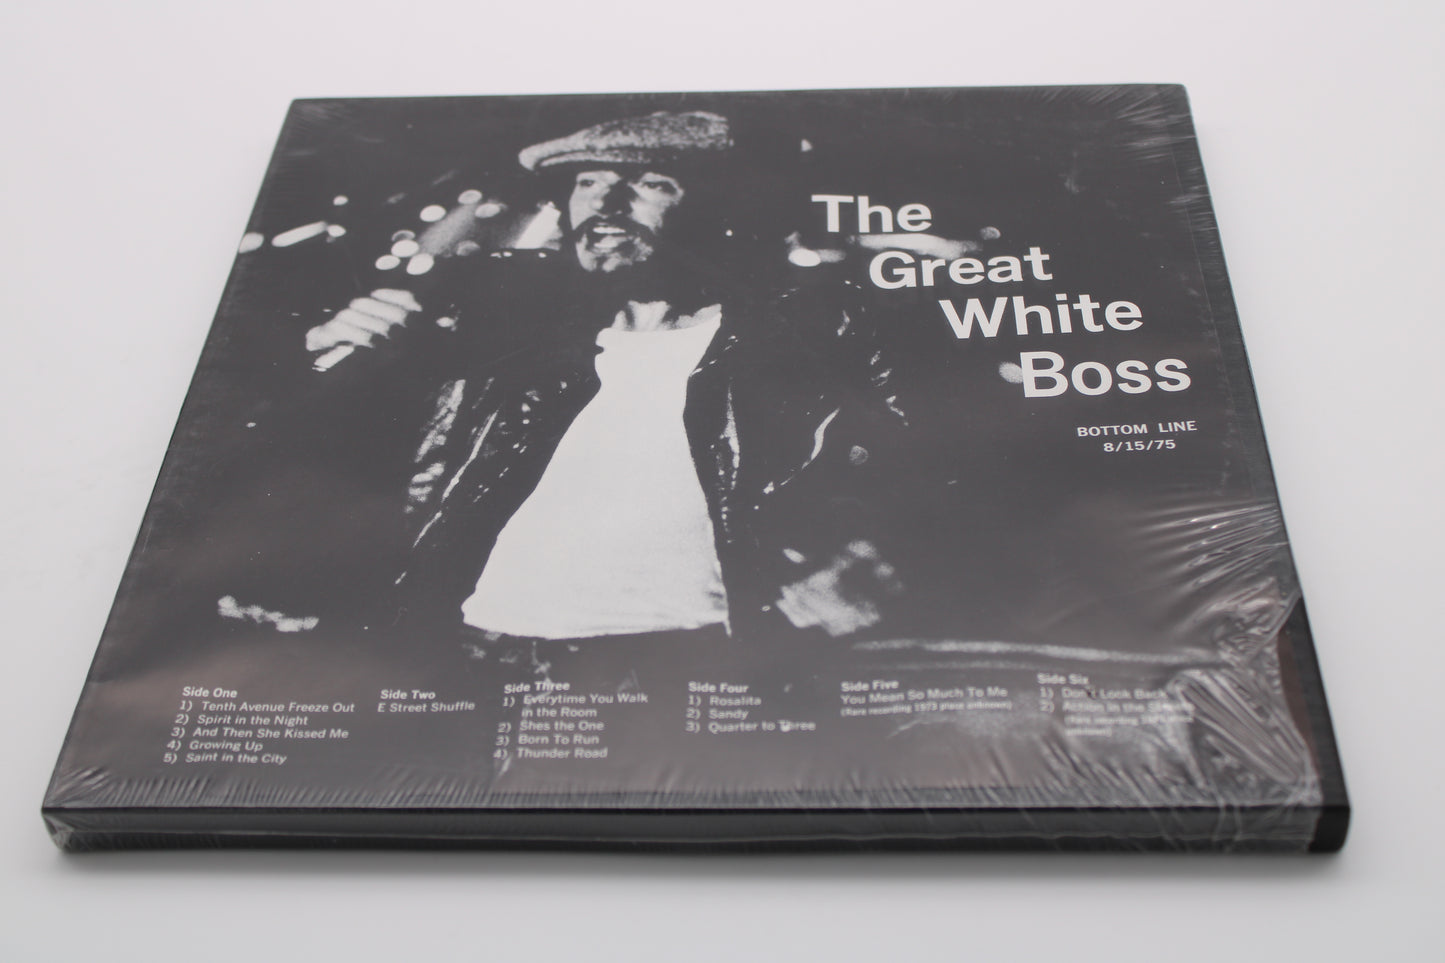 Bruce Springsteen - SEALED - The Great White Boss - Live at The Bottom Line in NYC 1975 - Vinyl 3 LPs - Box Set - BLV